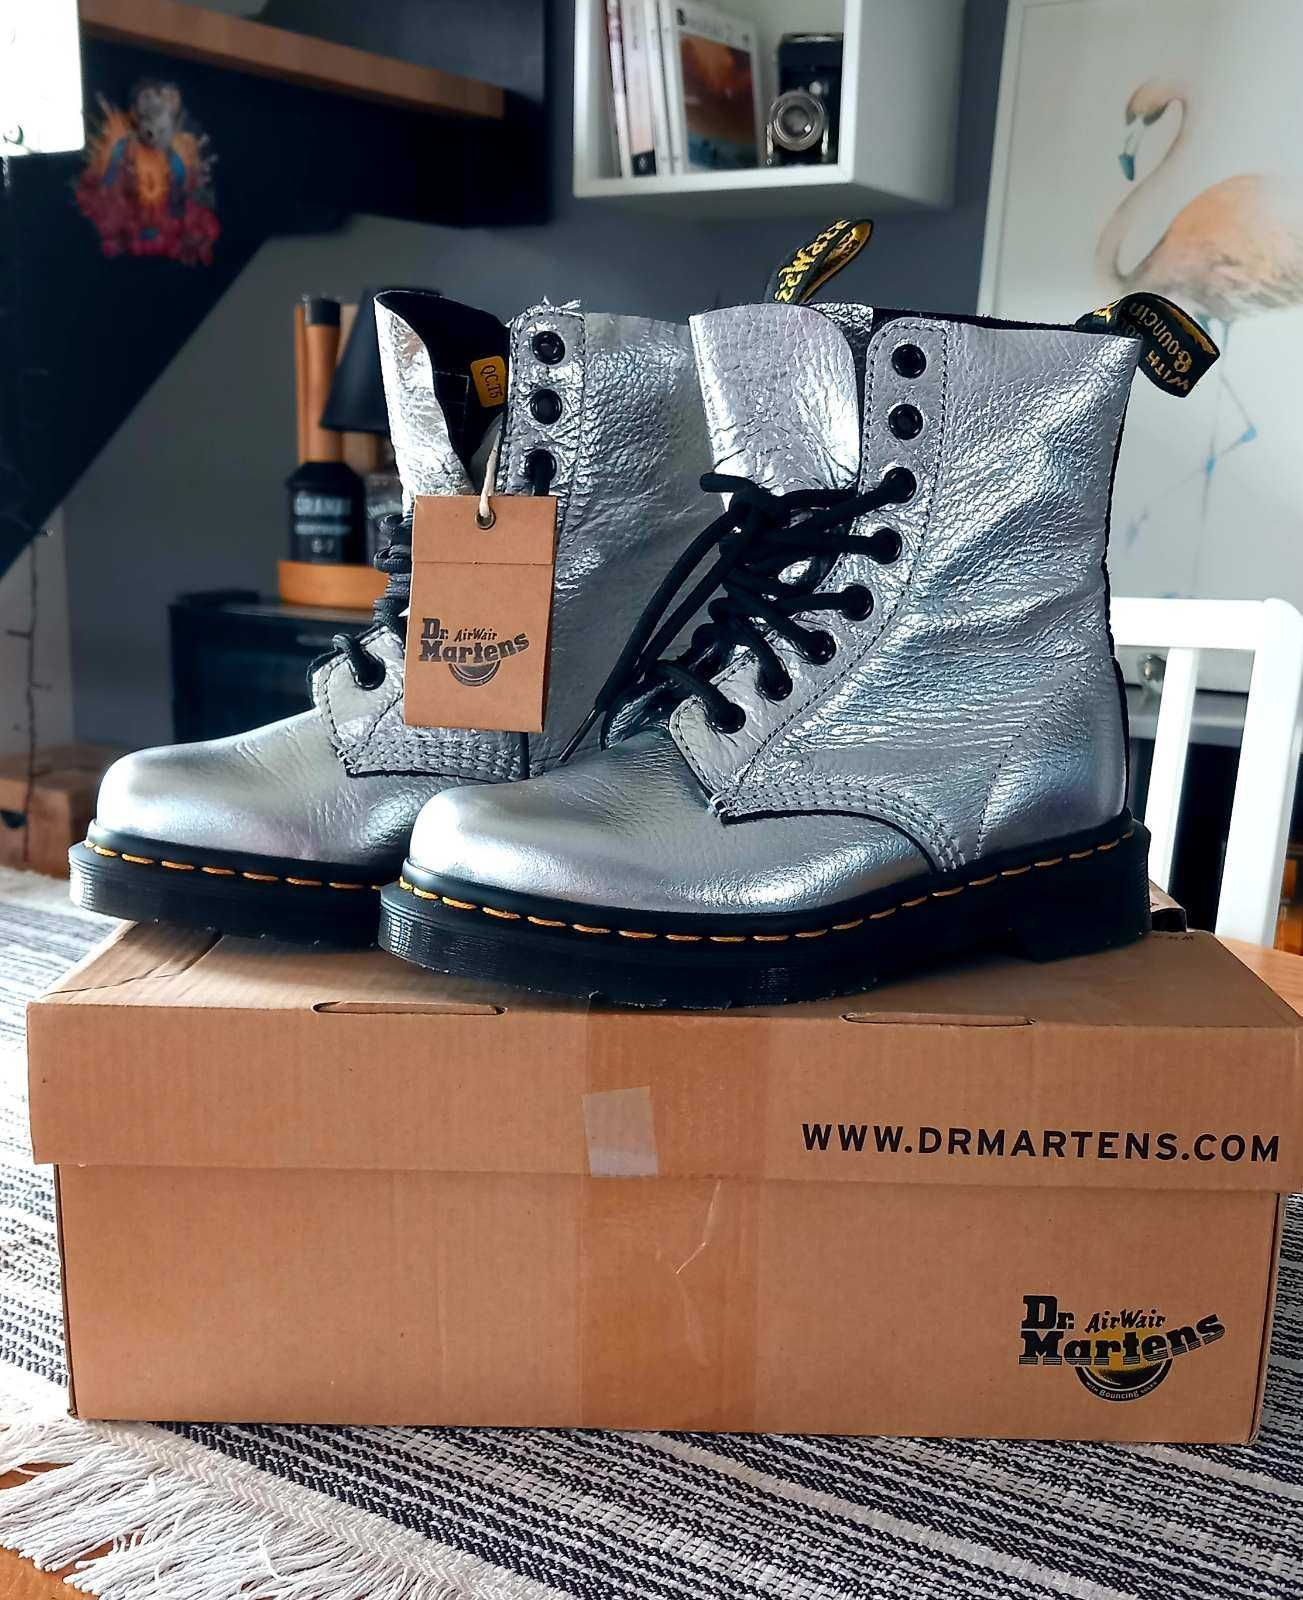 Nowe buty Dr. Martens Pascal Met Silver roz. 36